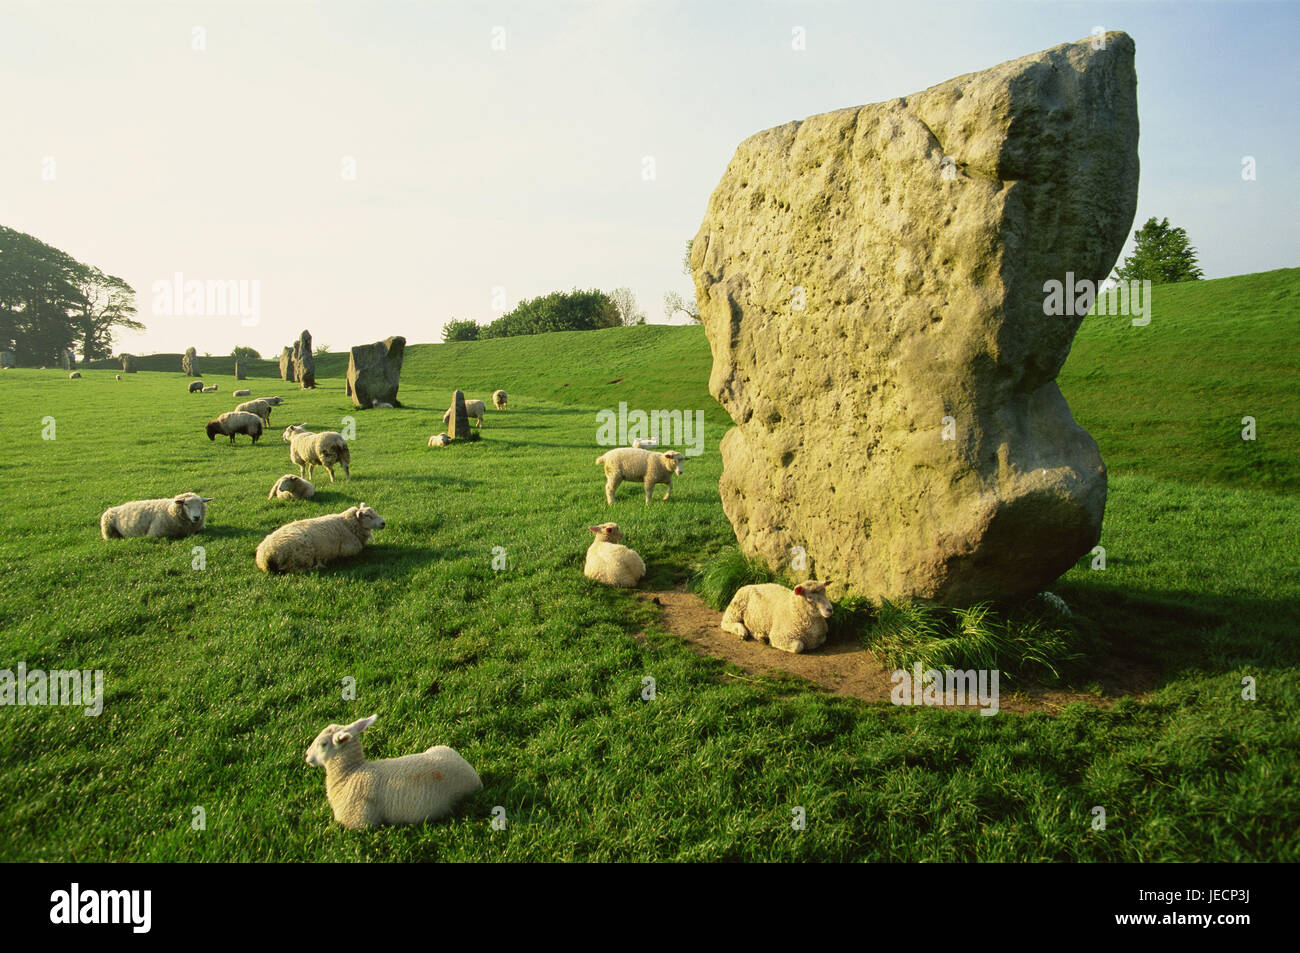 Great Britain, England, Wiltshire, Avebury, stone circle, sheep, Europe, south narrow country, place of interest, monument, stone circle attachment, landmark, cult site, cult attachment, historically, stone blocks, Megalithe, monoliths, array, mysteriously, mysteriously, mystically, prehistorically, cult, culture, occultism, spirituality, past, UNESCO-world cultural heritage, summer, destination, tourism, pasture, meadow, animals, graze, Stock Photo